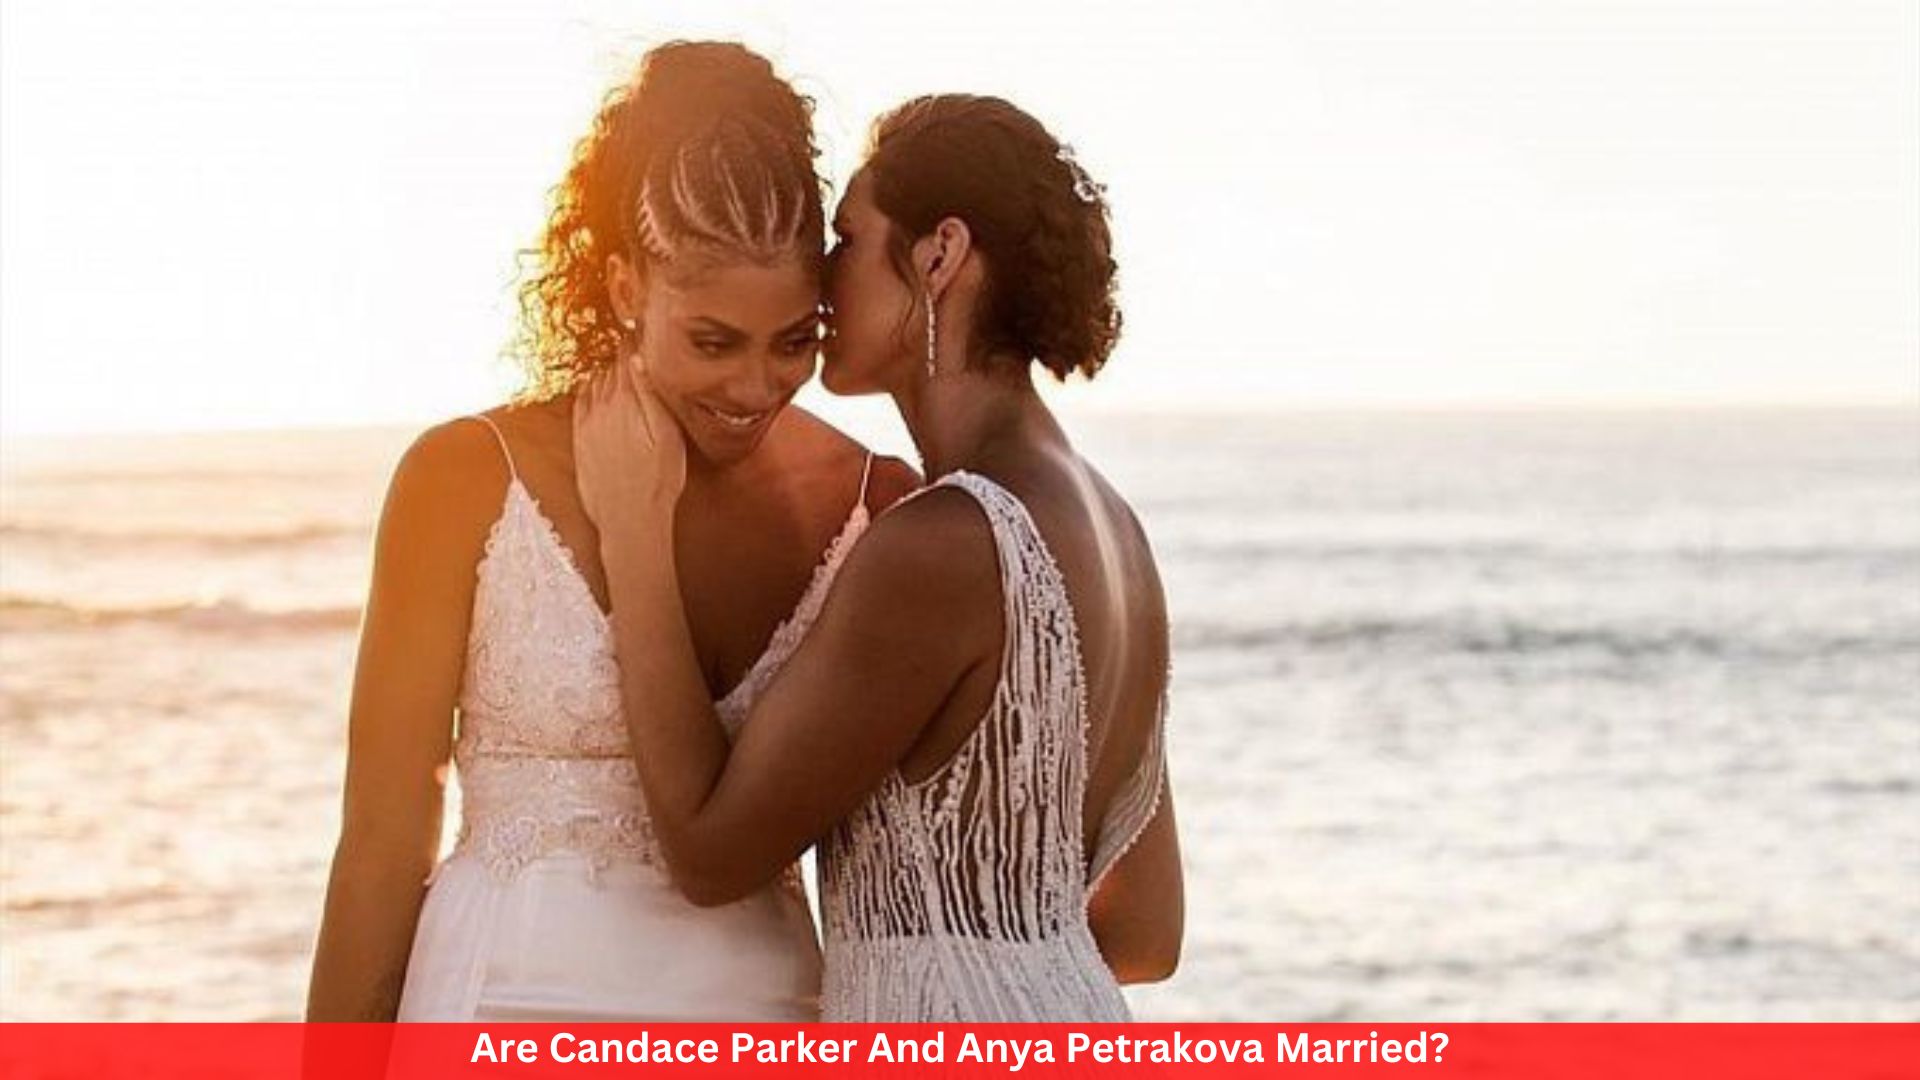 Are Candace Parker And Anya Petrakova Married?